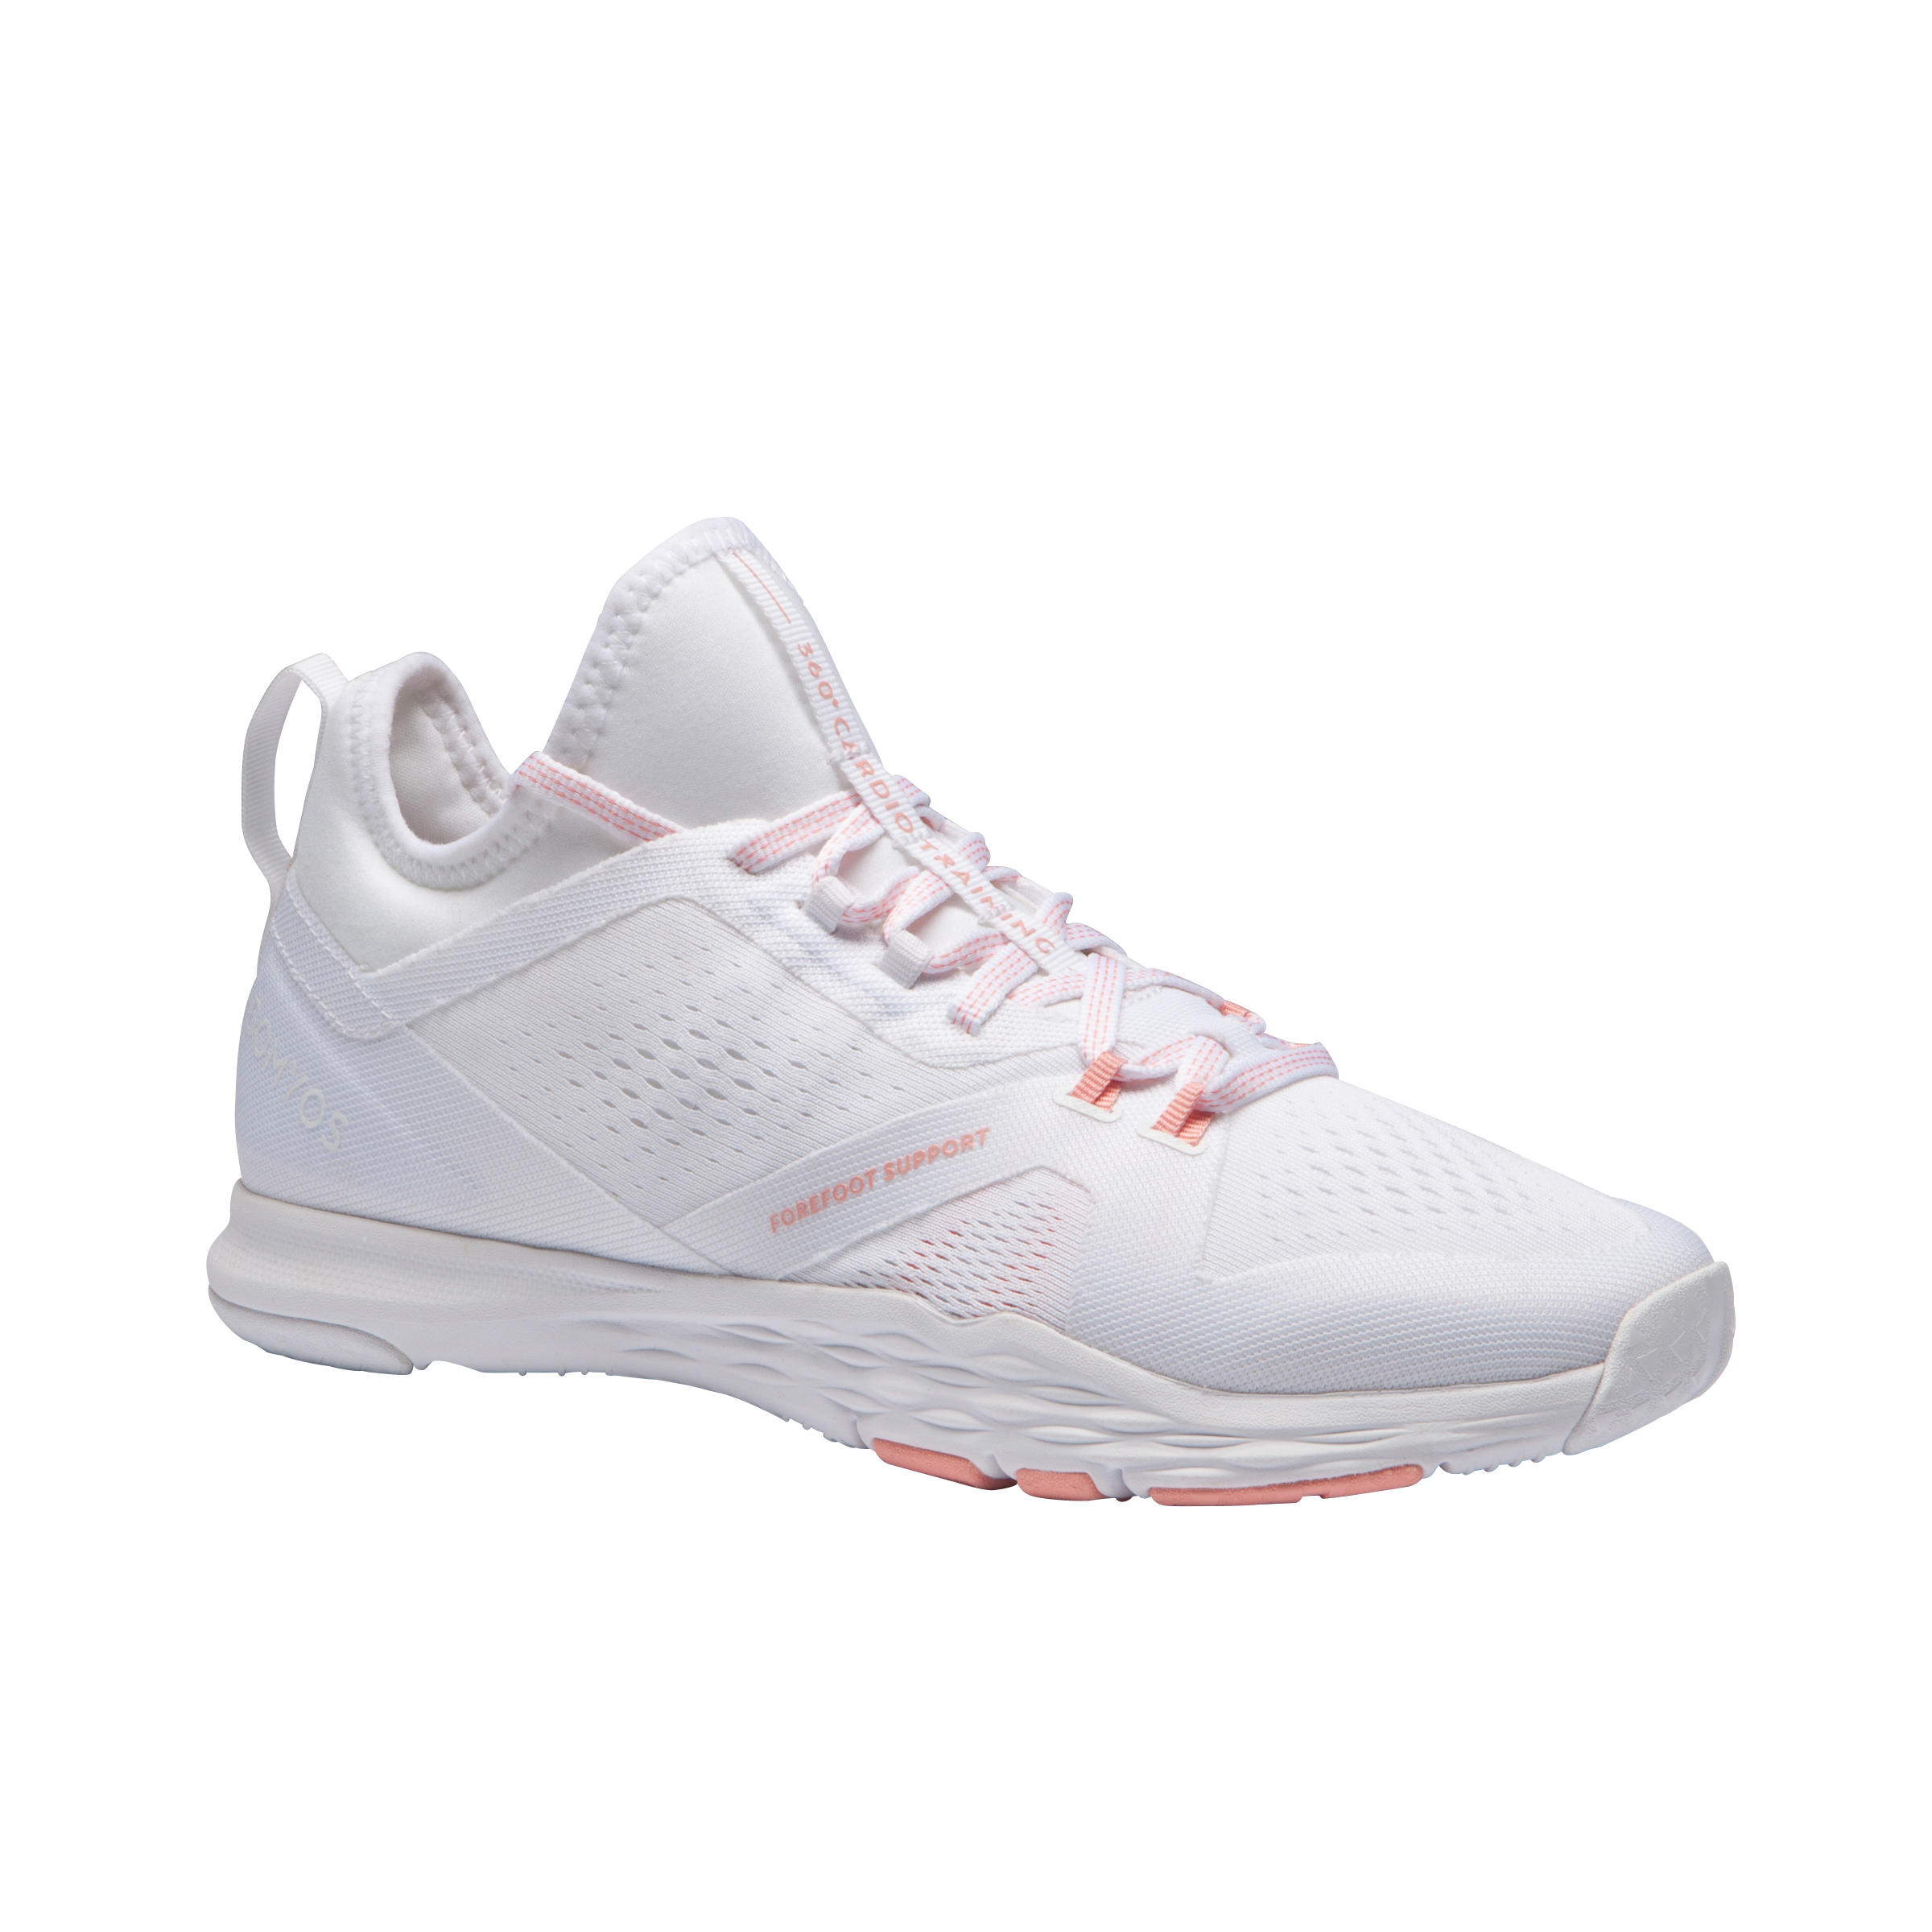 Gym Trainers | Sports Shoes | Men 